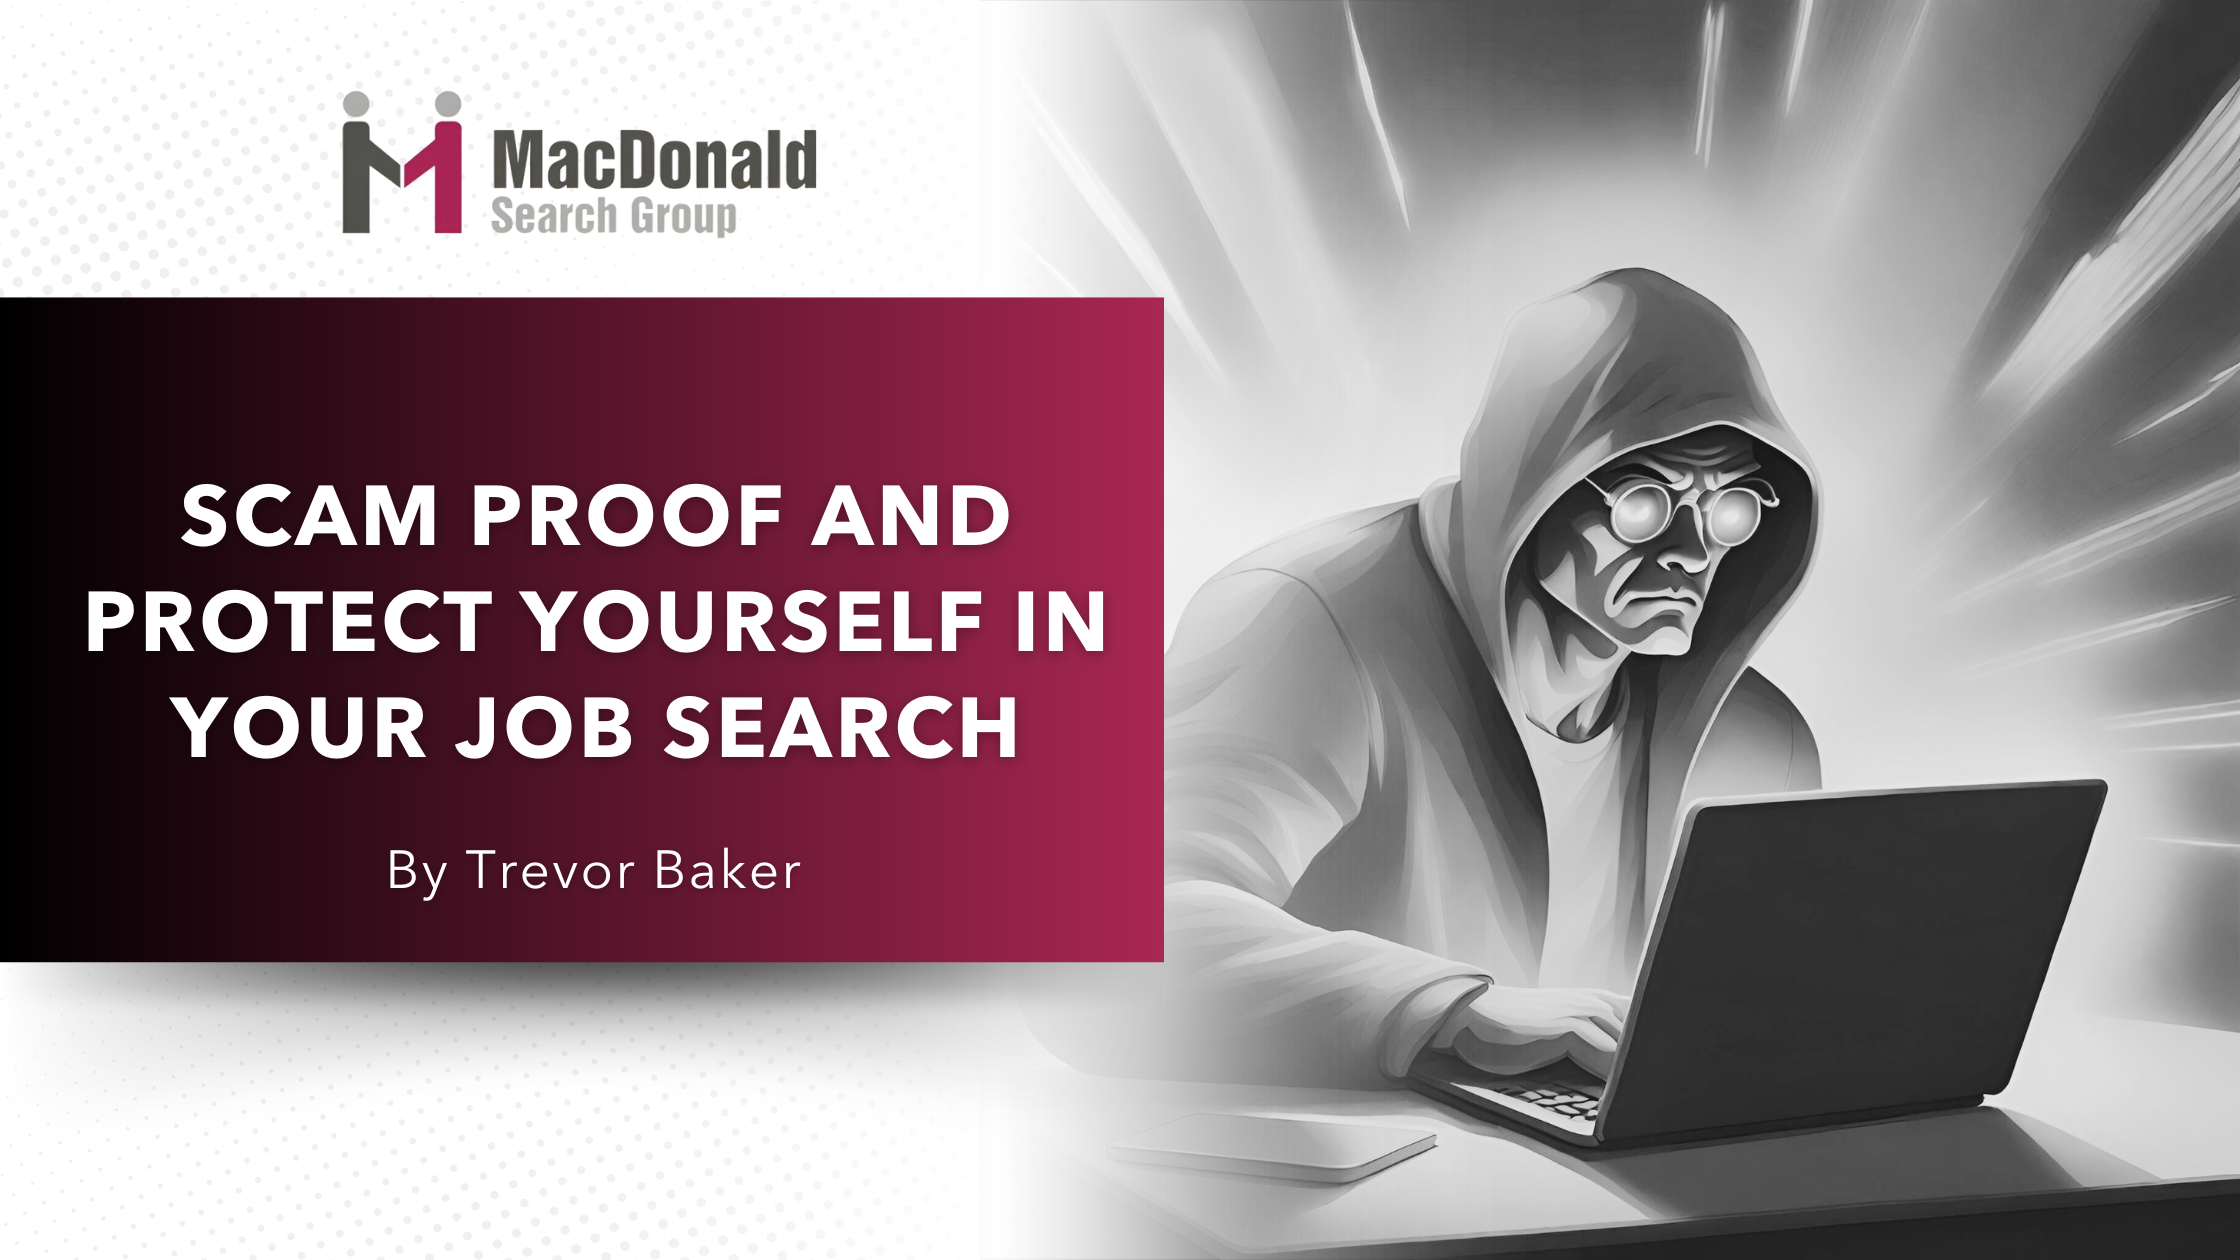 Scam Proof and Protect Yourself in your Job Search